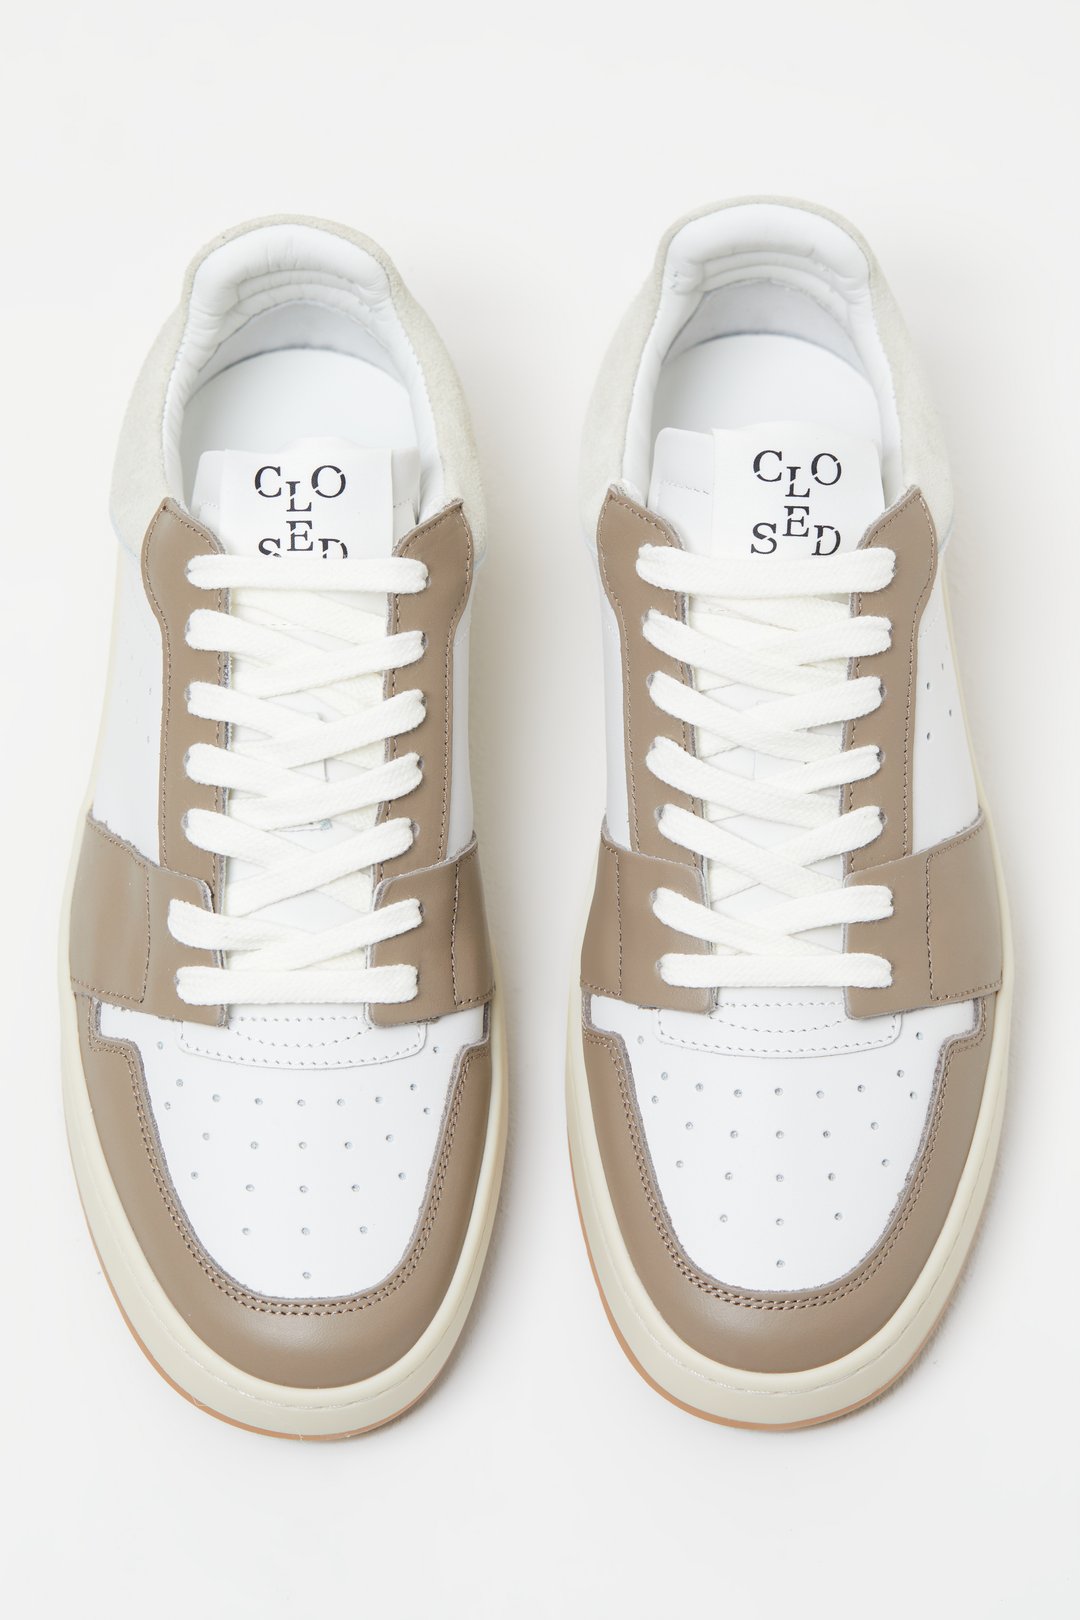 CLOSED WOMENS LOW TOP SNEAKER - TAUPE BEIGE